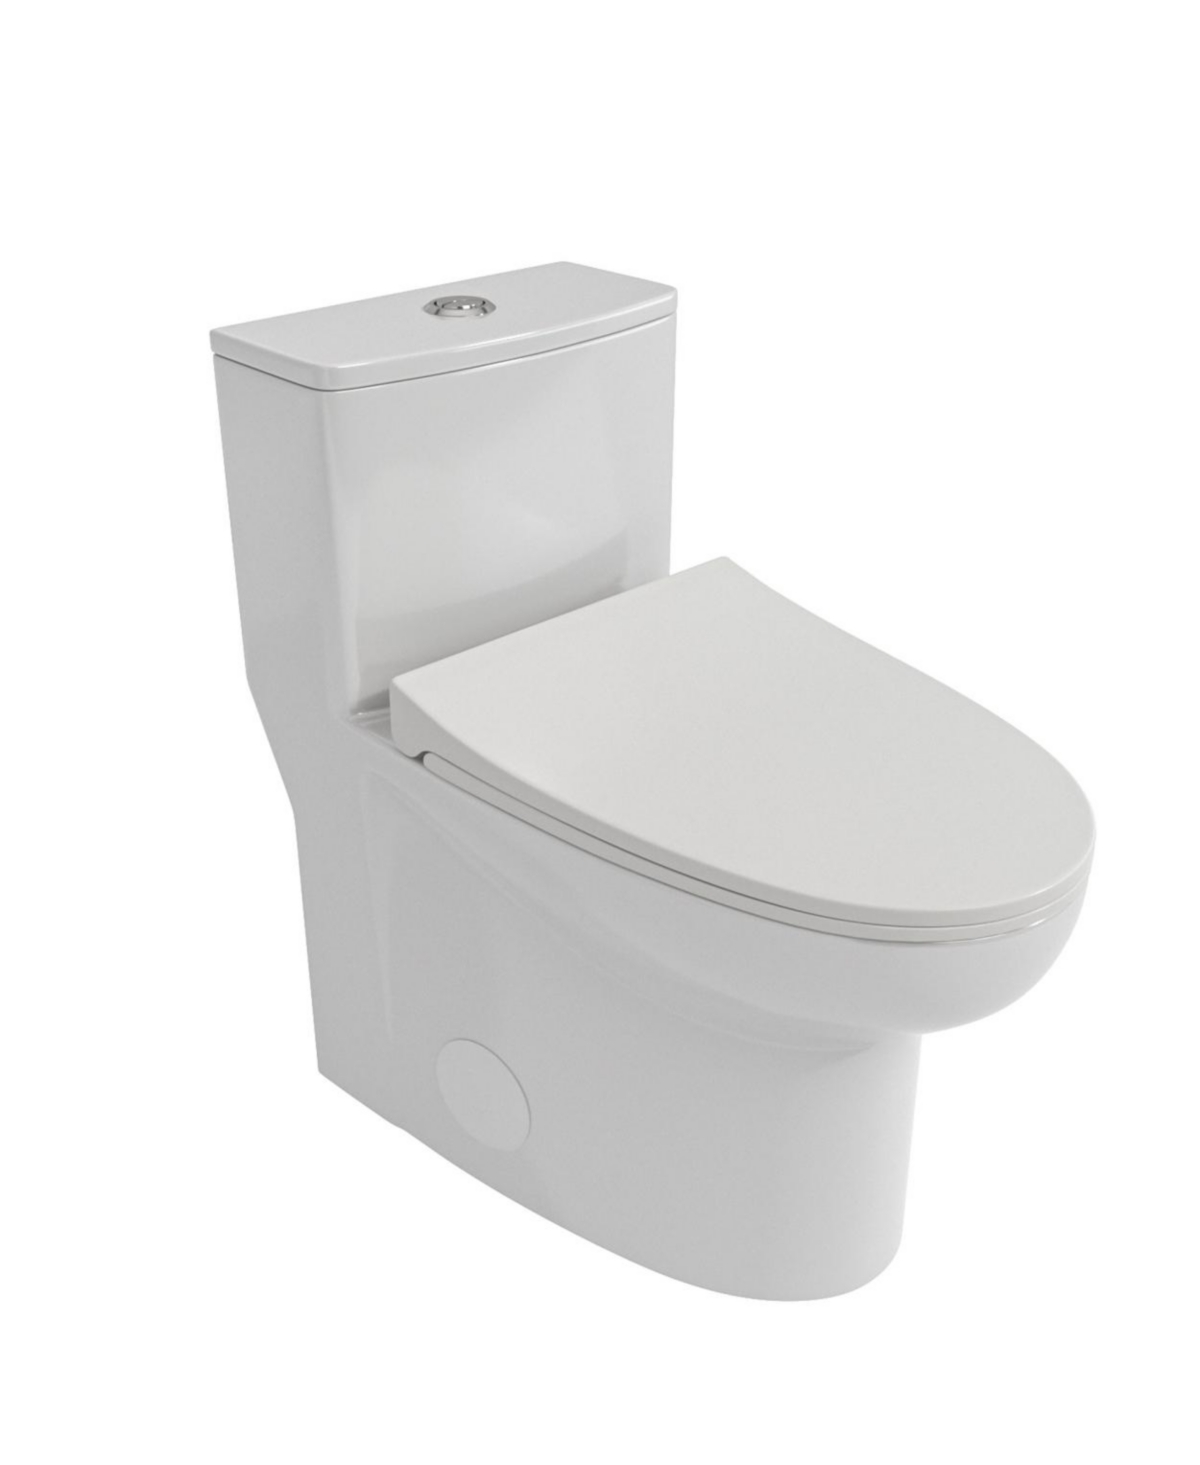 Ceramic One Piece Toilet, Dual Flush With Soft Closing Seat 0002 - White